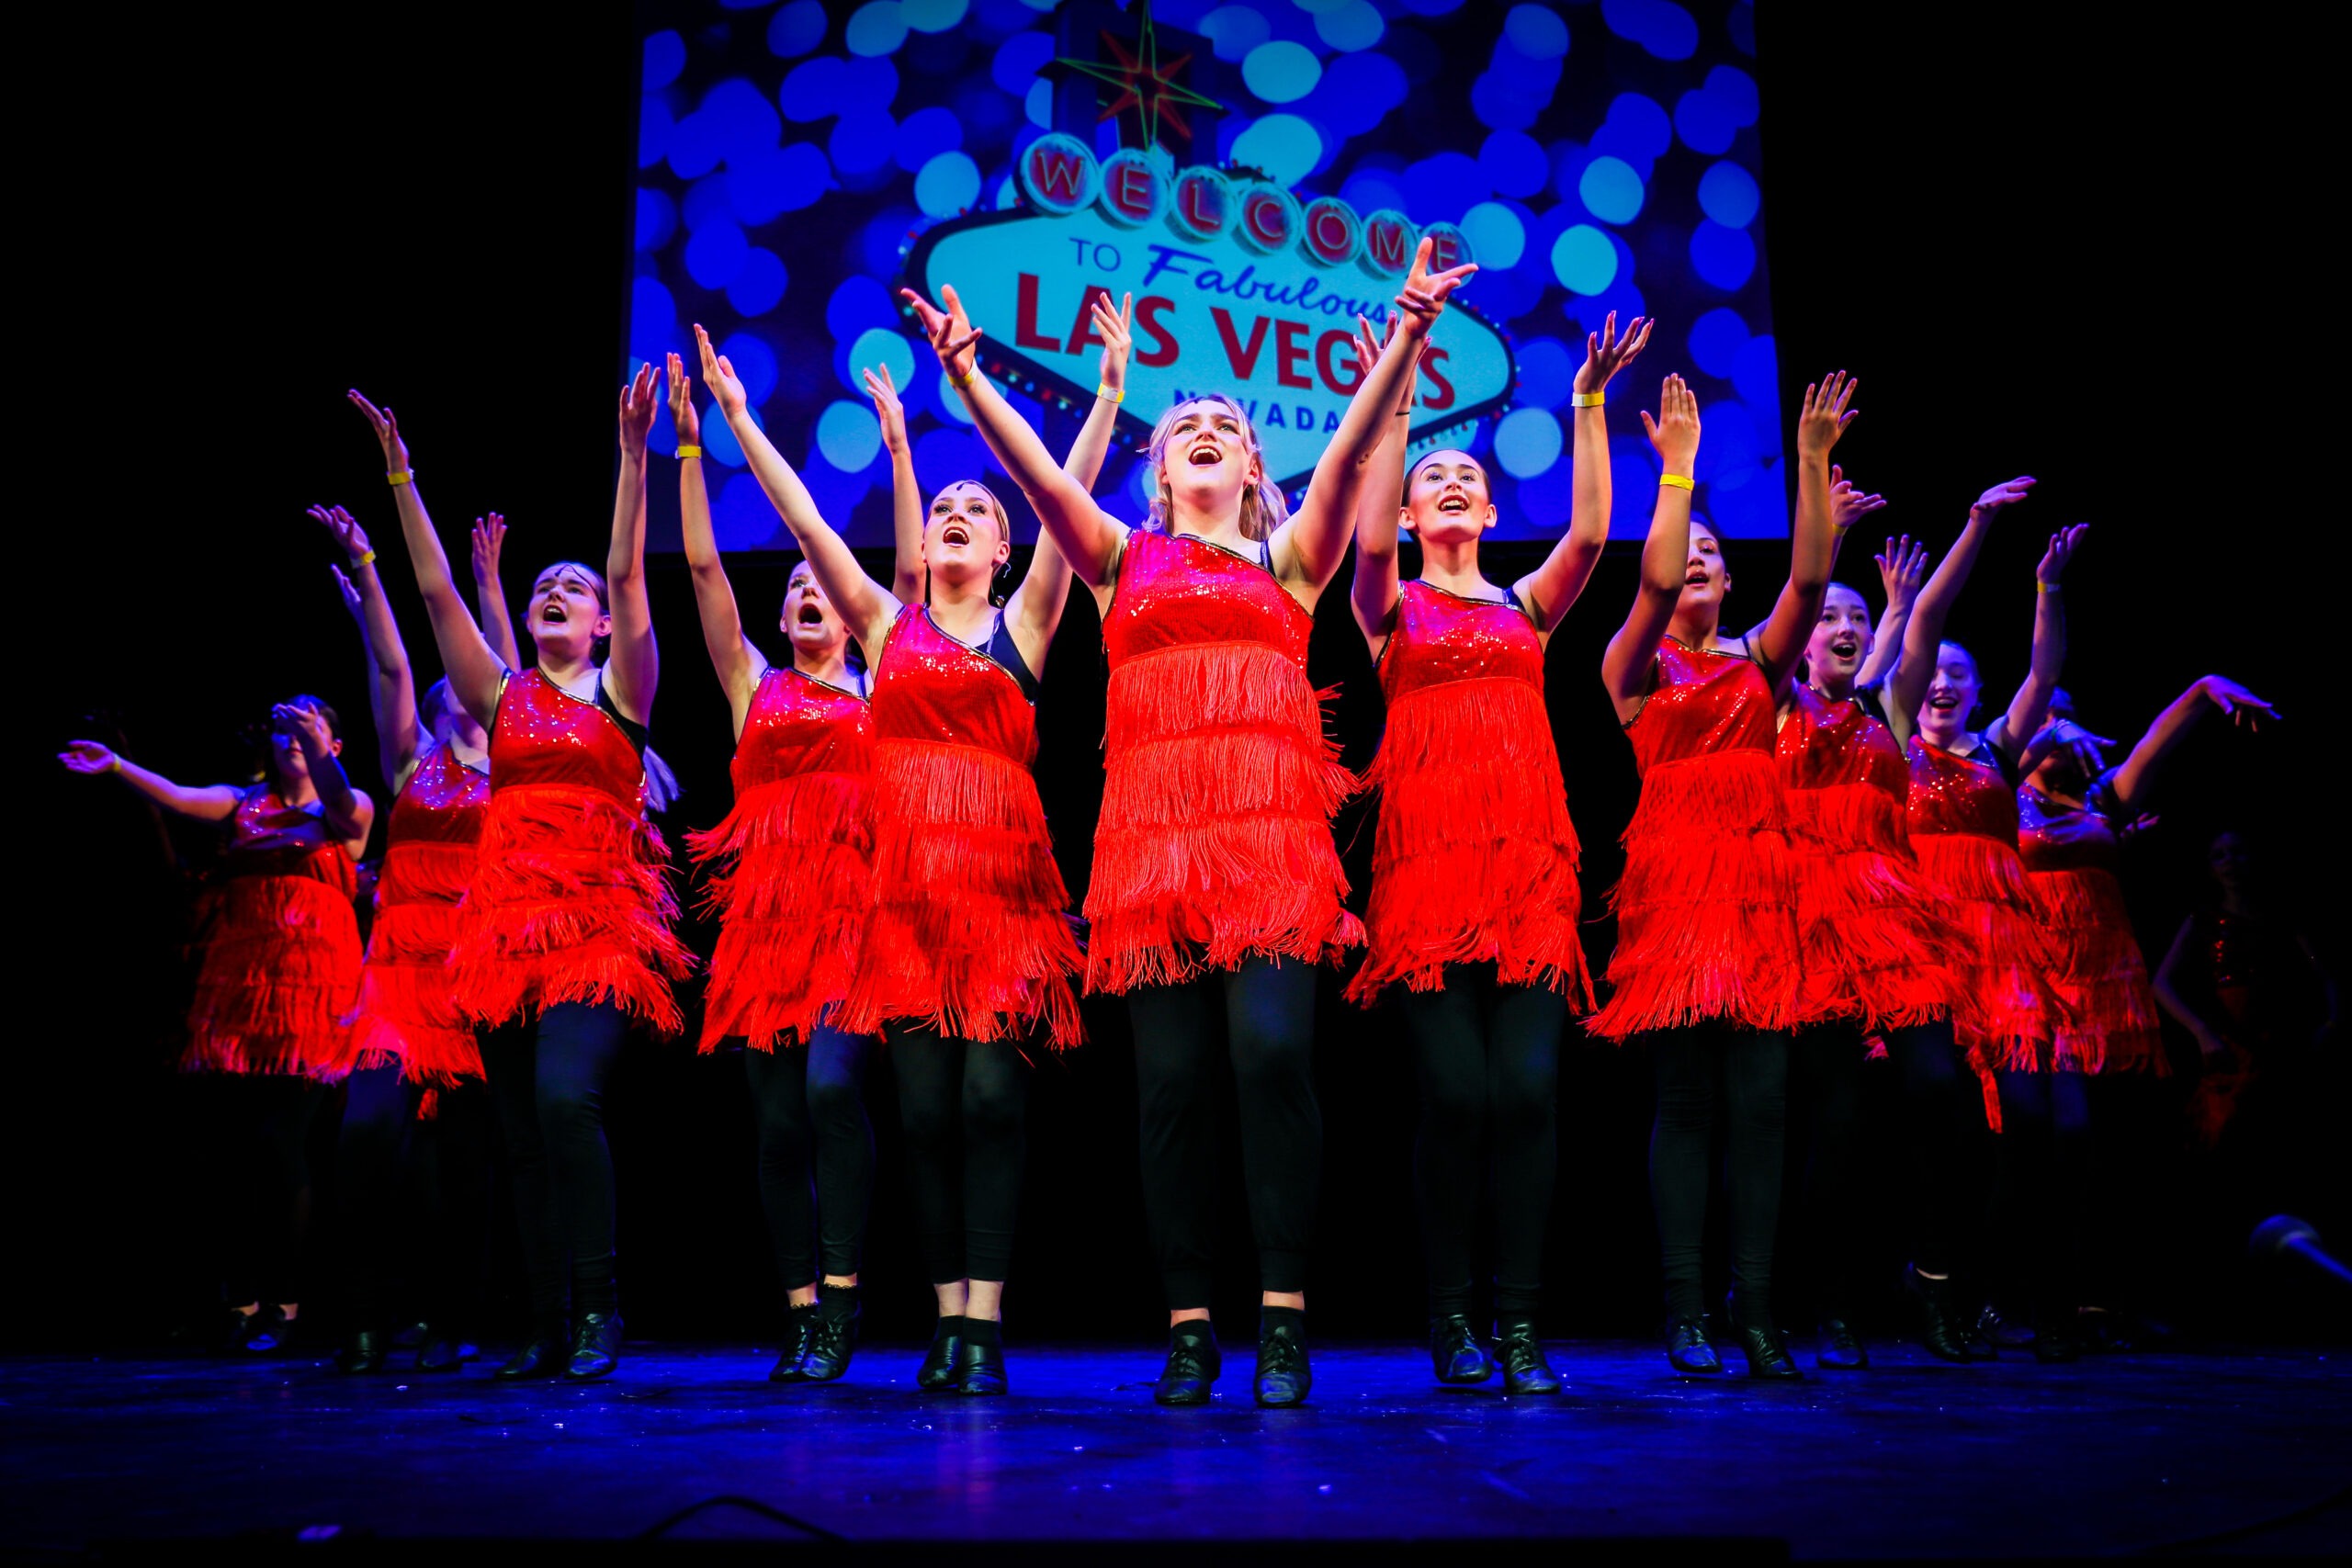 Welsh Performing Arts Students shine in West-End Shaftesbury Spectacle